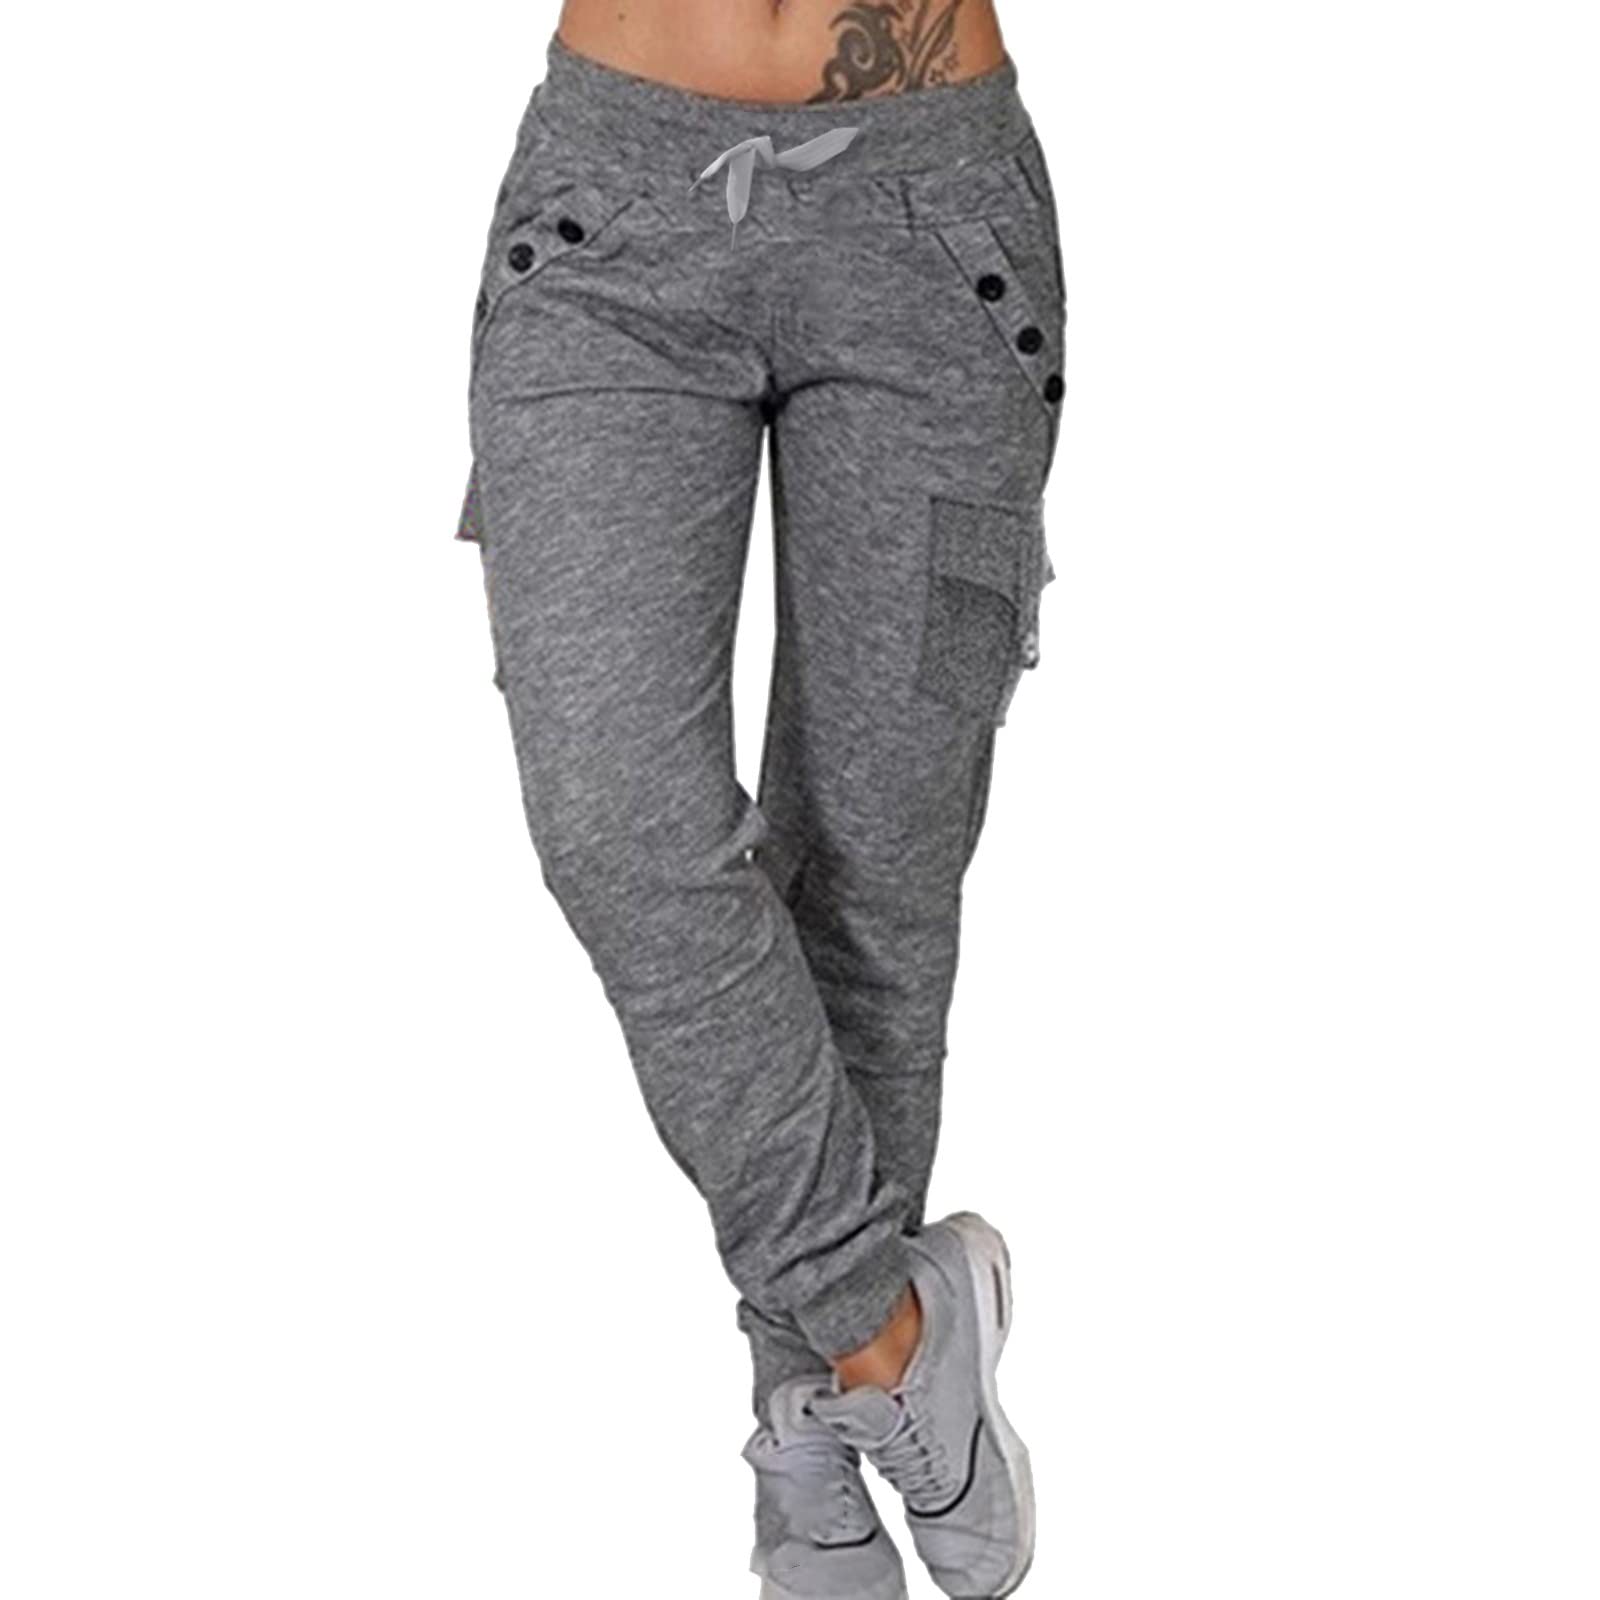 Comfortable fit Women's joggers- Grey color